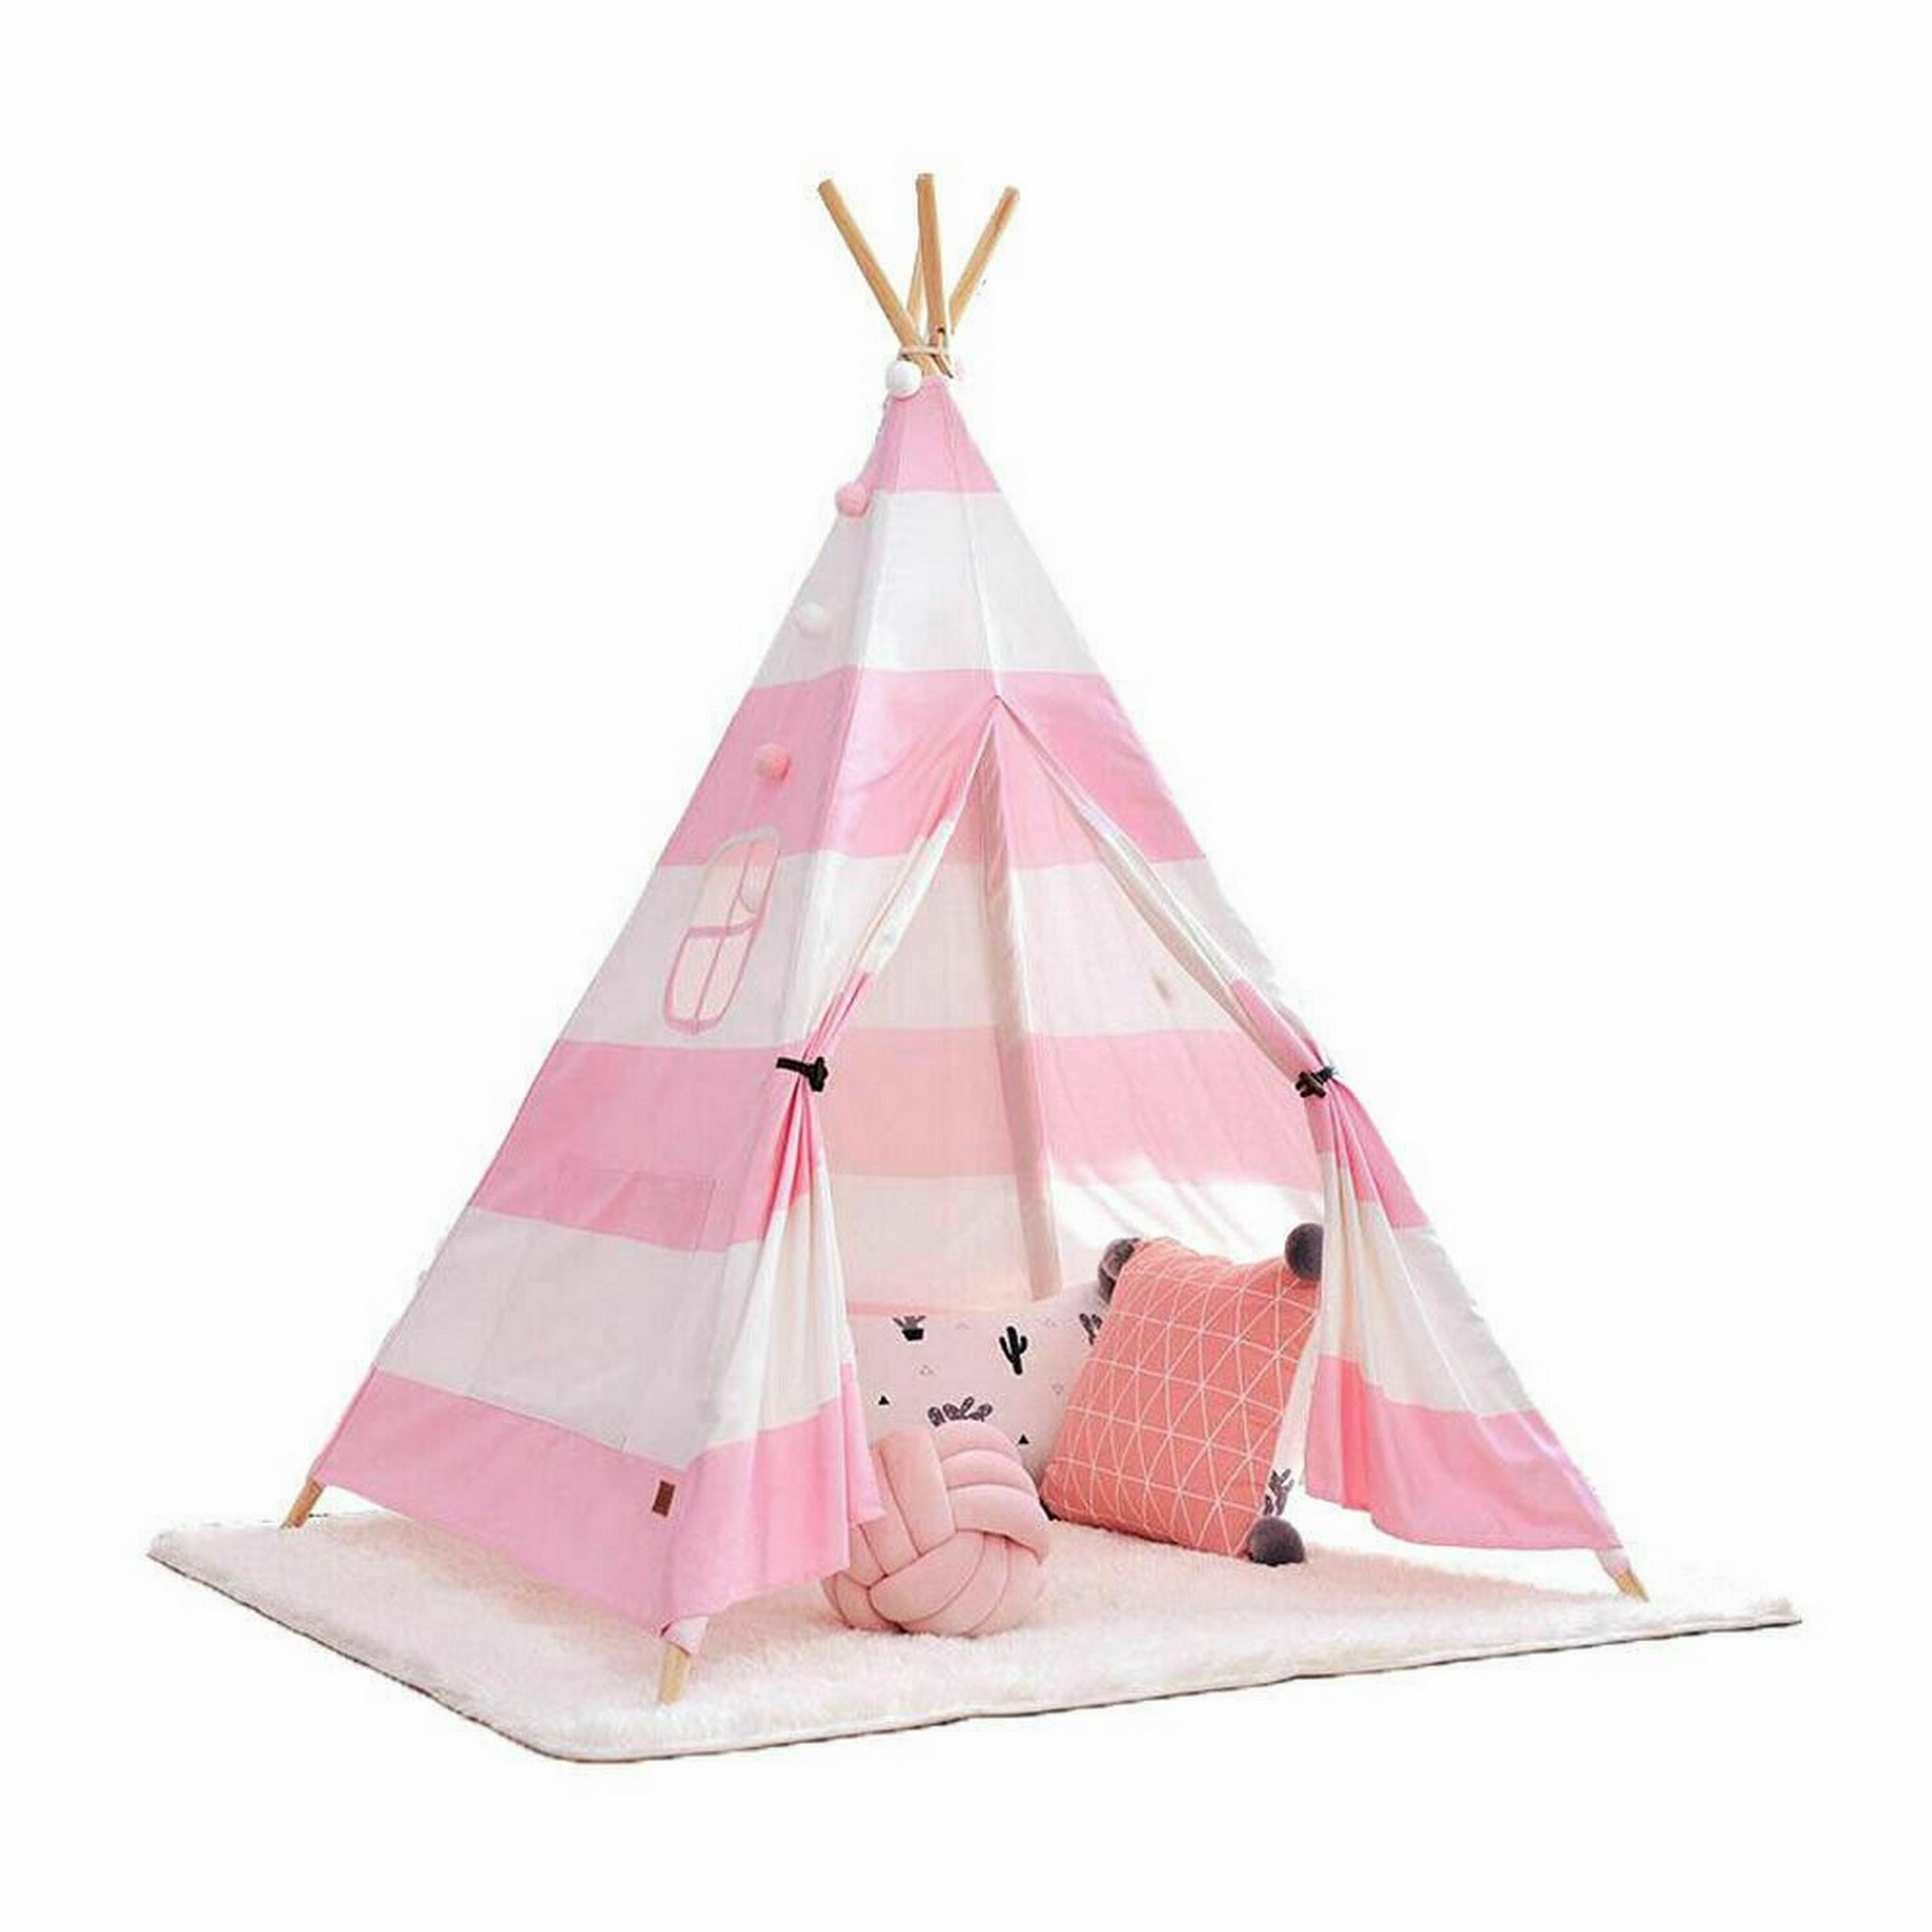 Canvas Tipi Tent for Girls & Boys Pink & White Teepee Tent for Girls & Boys Teepee Tent for Kids Indoor Play Tents Foldable & Small with Colorful Flags and Pocket